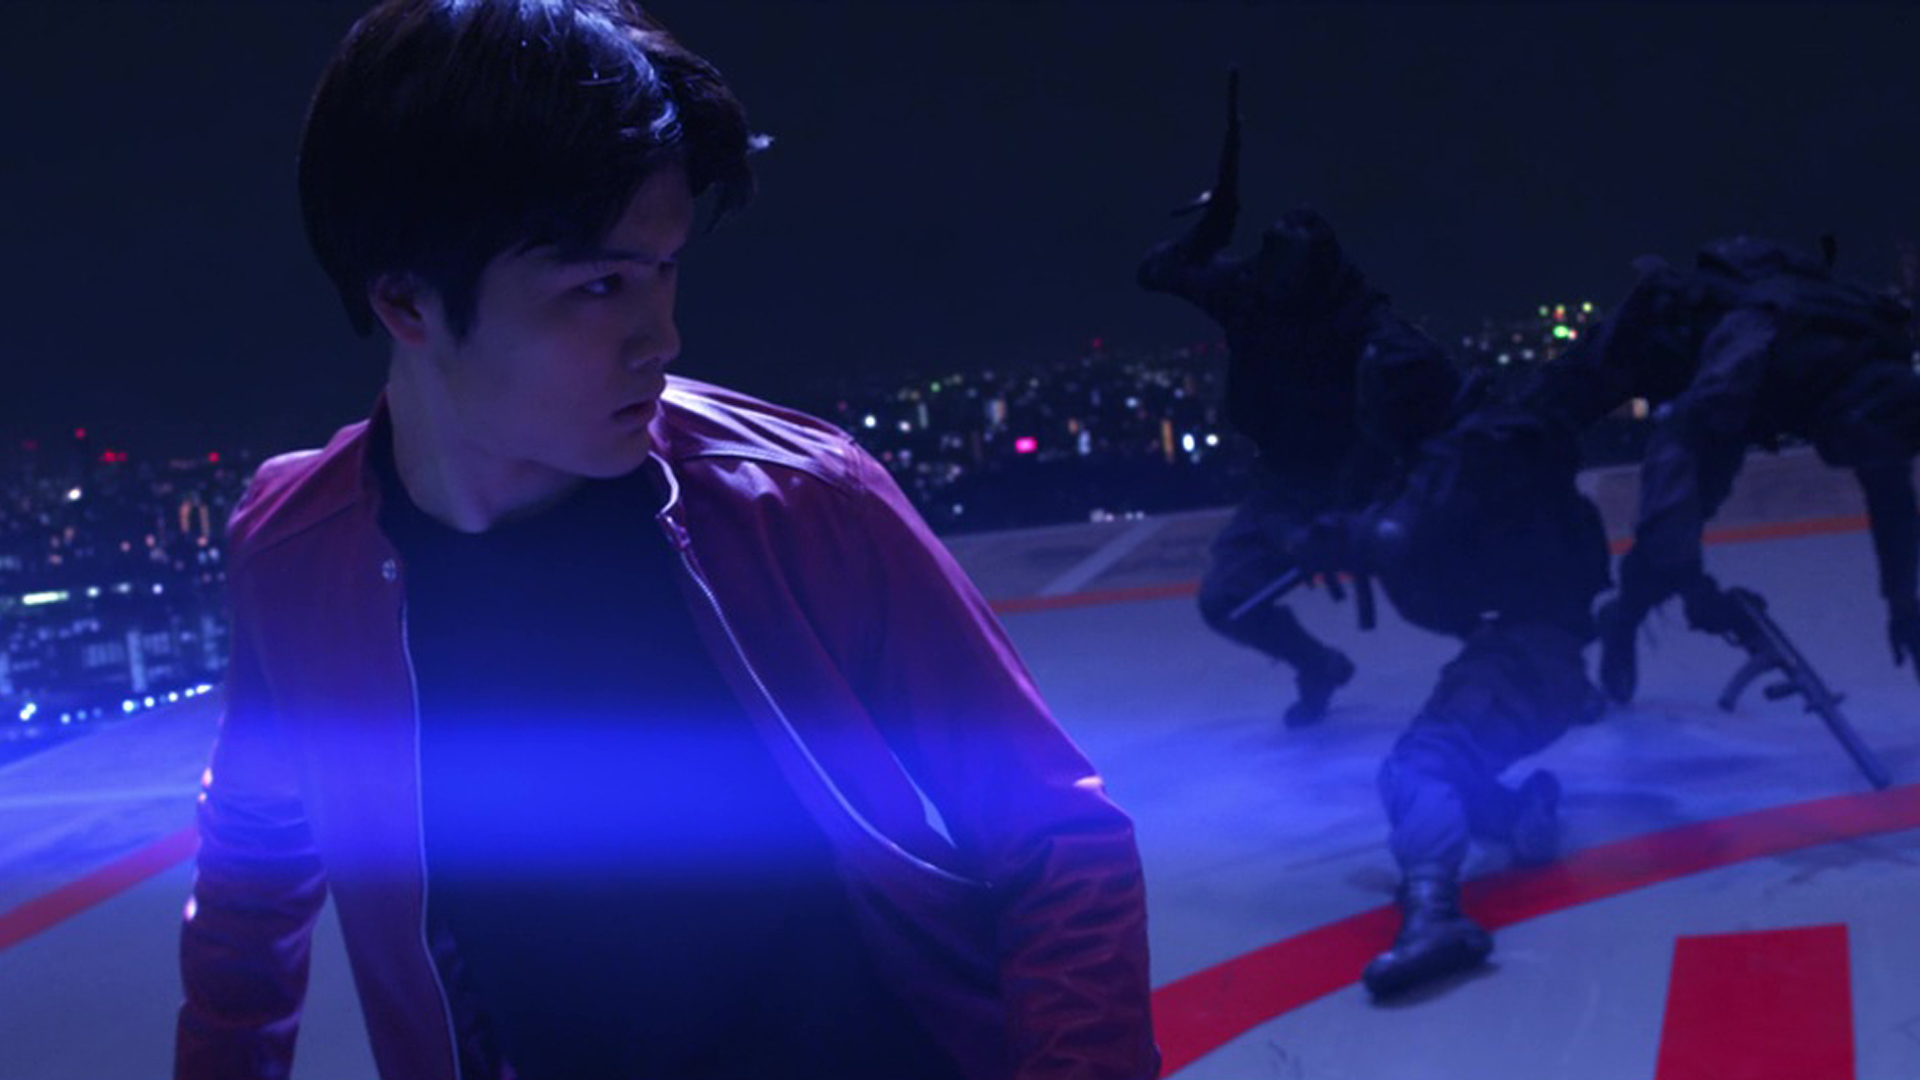 Good Ol’ Review: Imperfect “Kikaider Reboot” Offers Glimpse of Great Potential